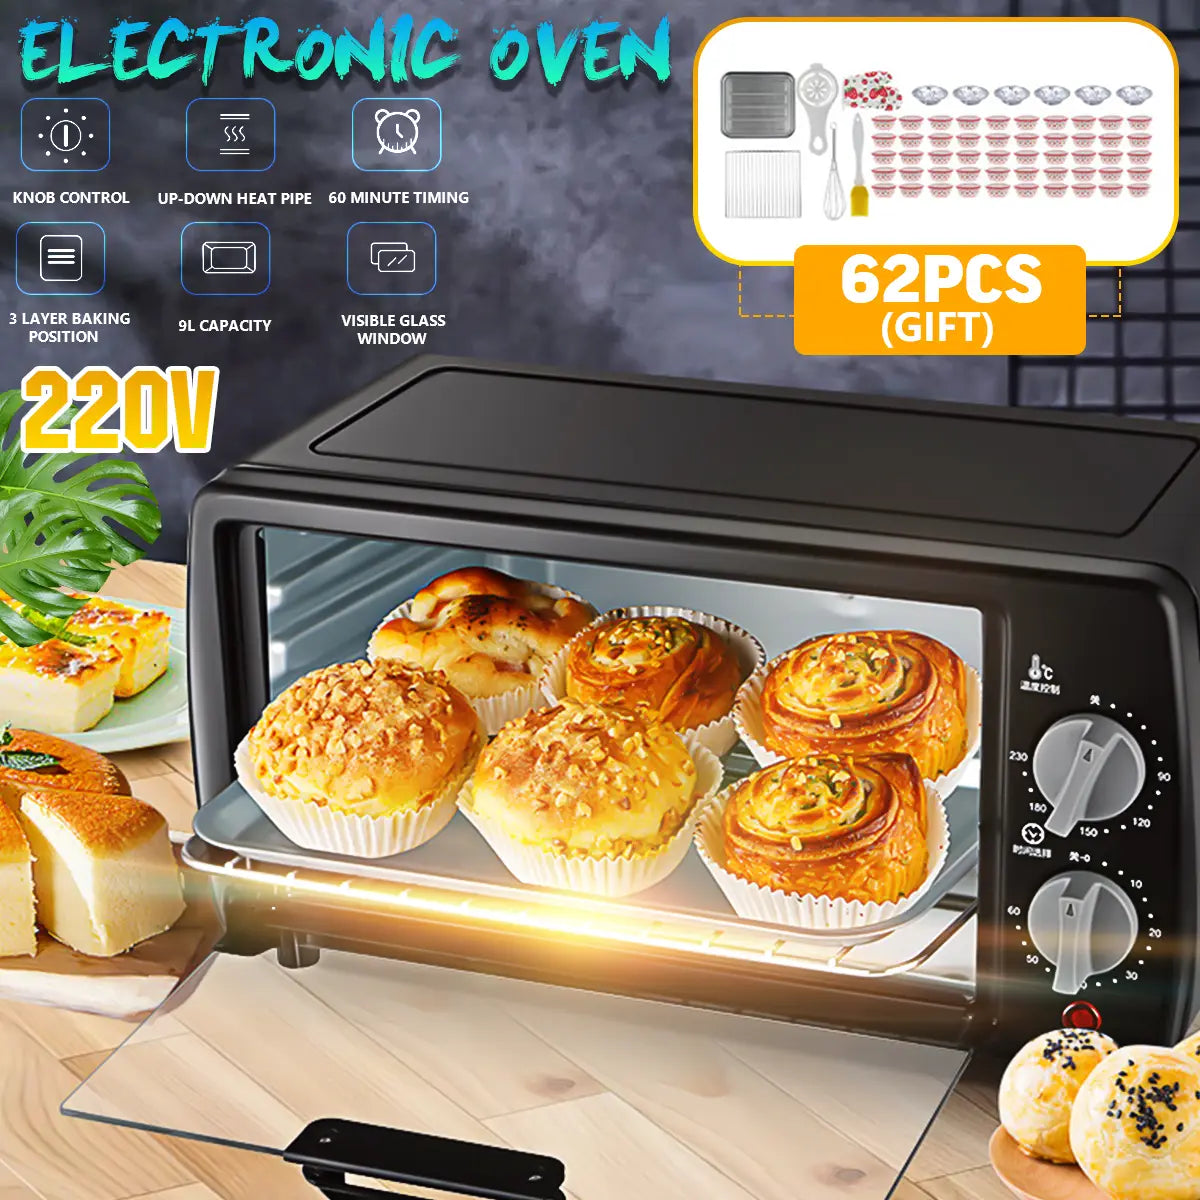 Benchtop Electric Oven - 9l 220v Oven, Temperature Control